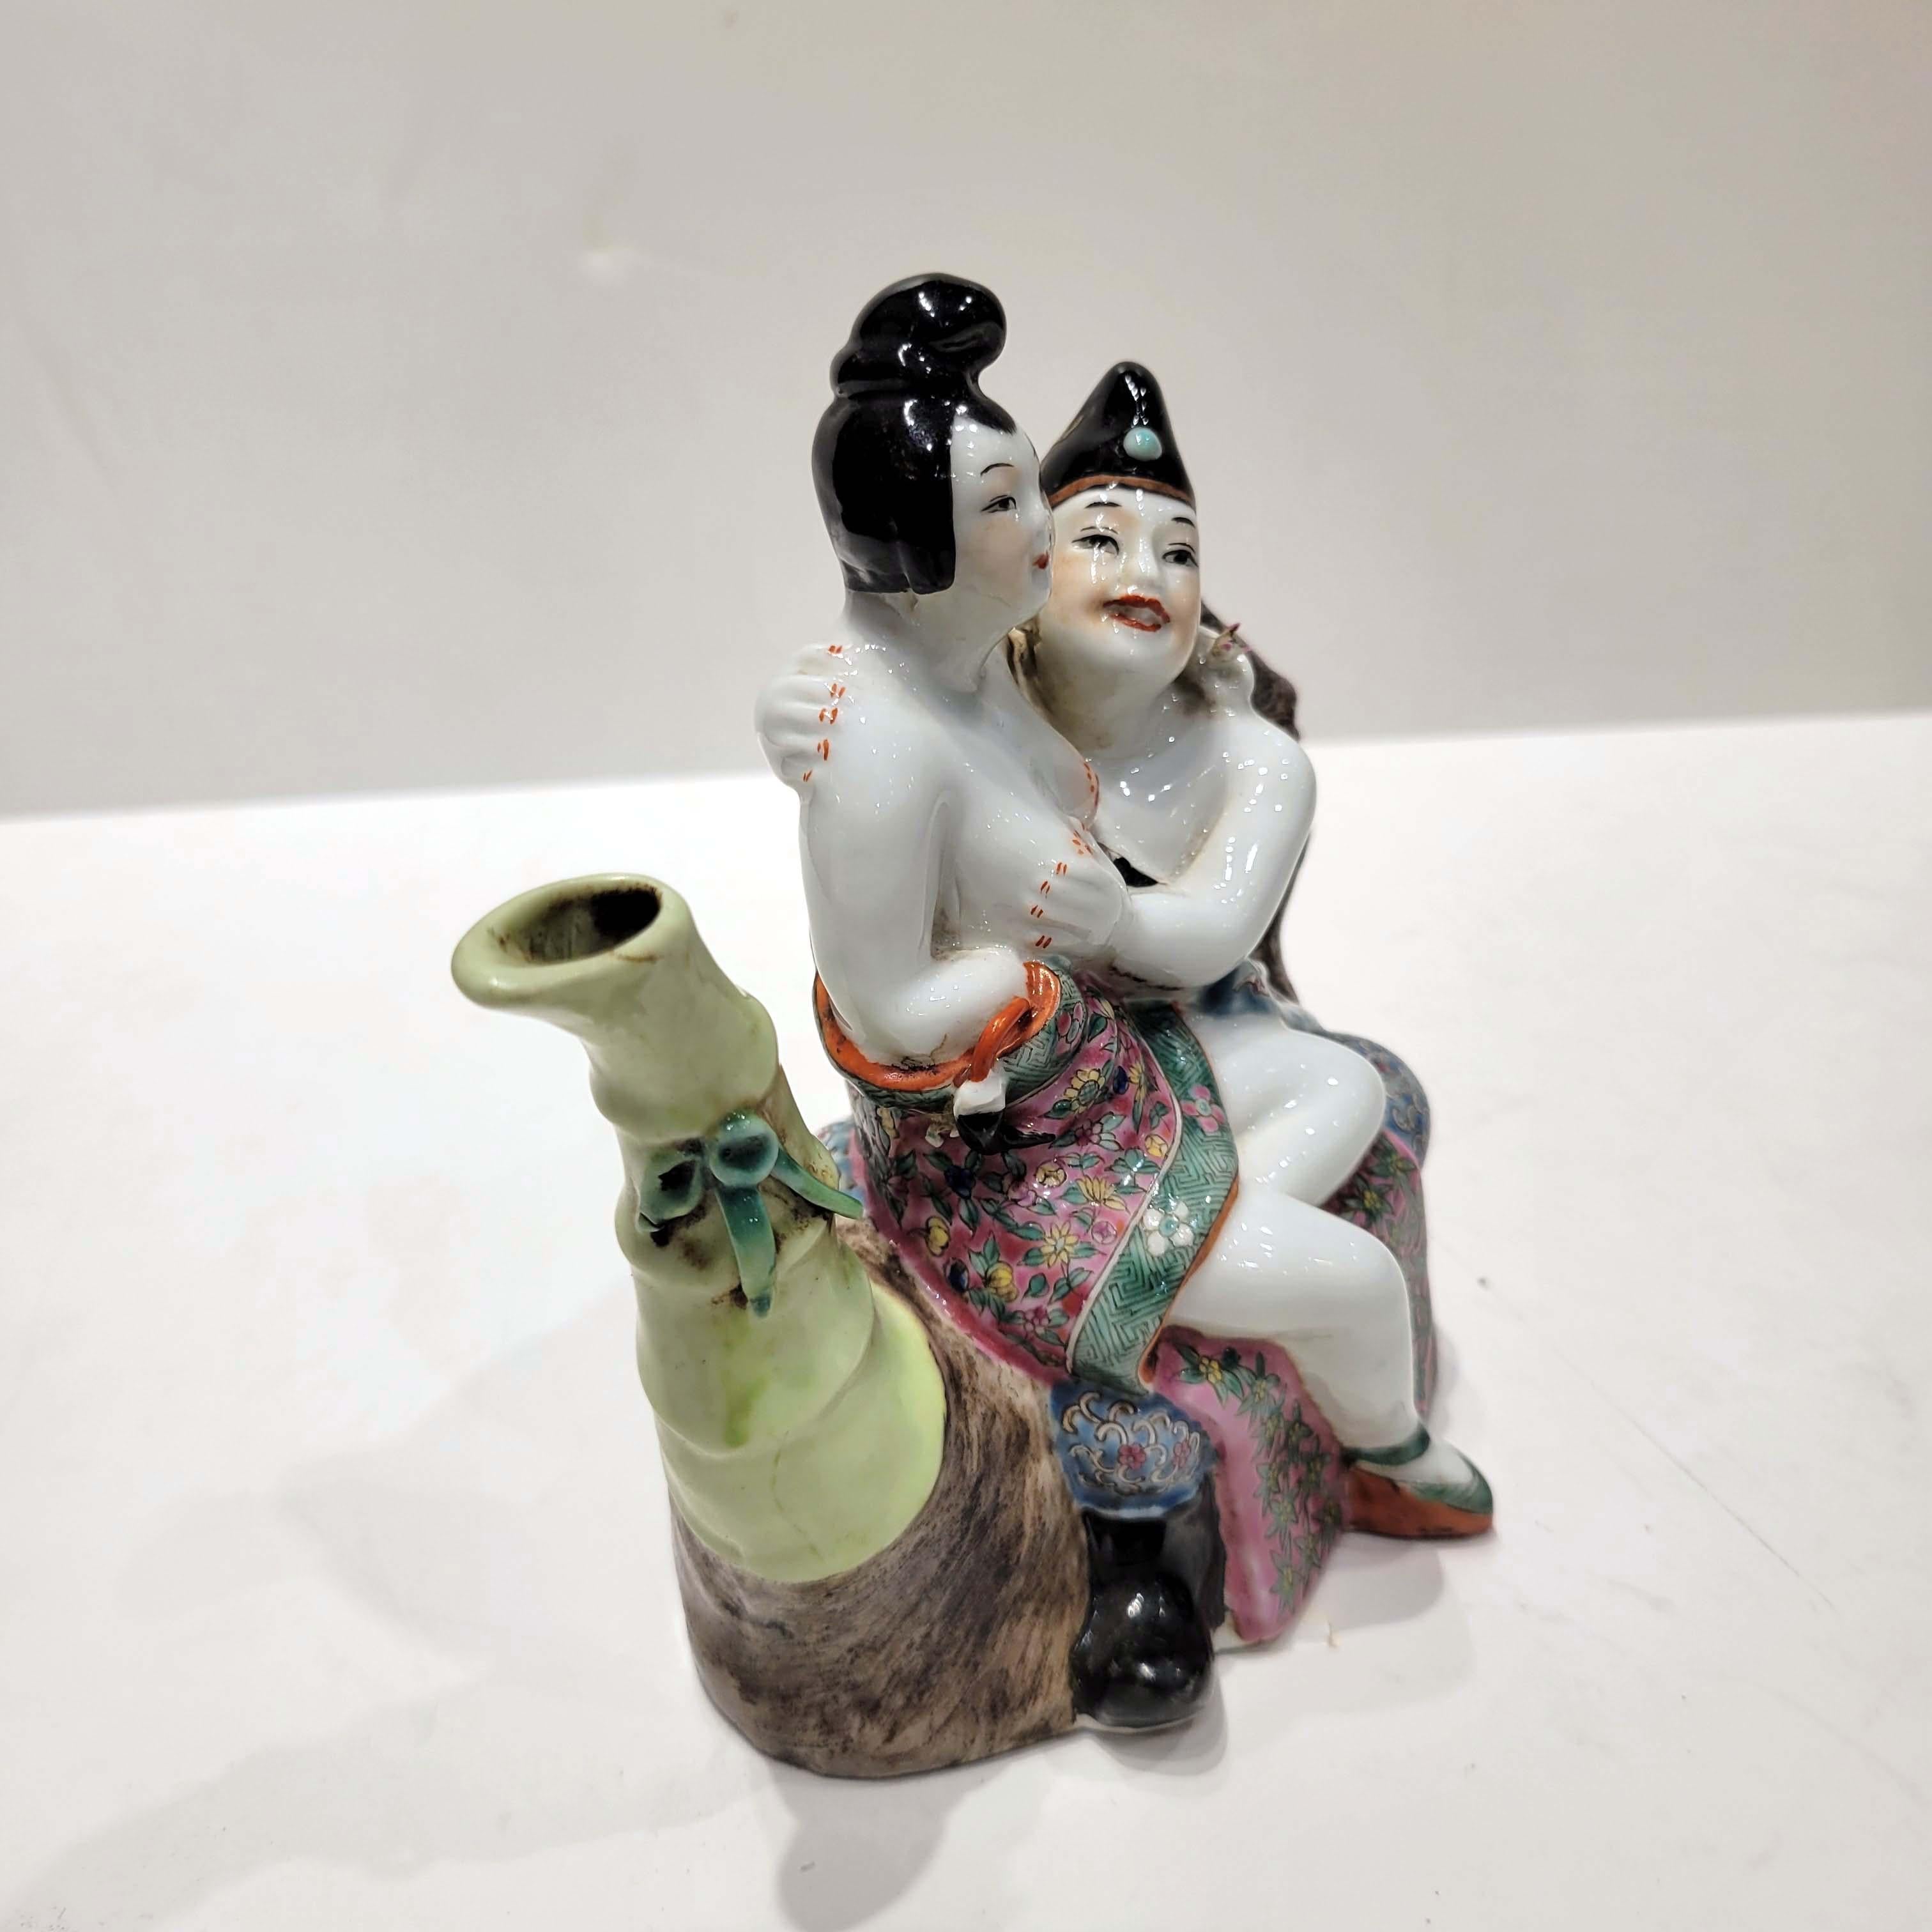 Republic Period Chinese Export Porcelain Wine Ewer, Erotic For Sale 2